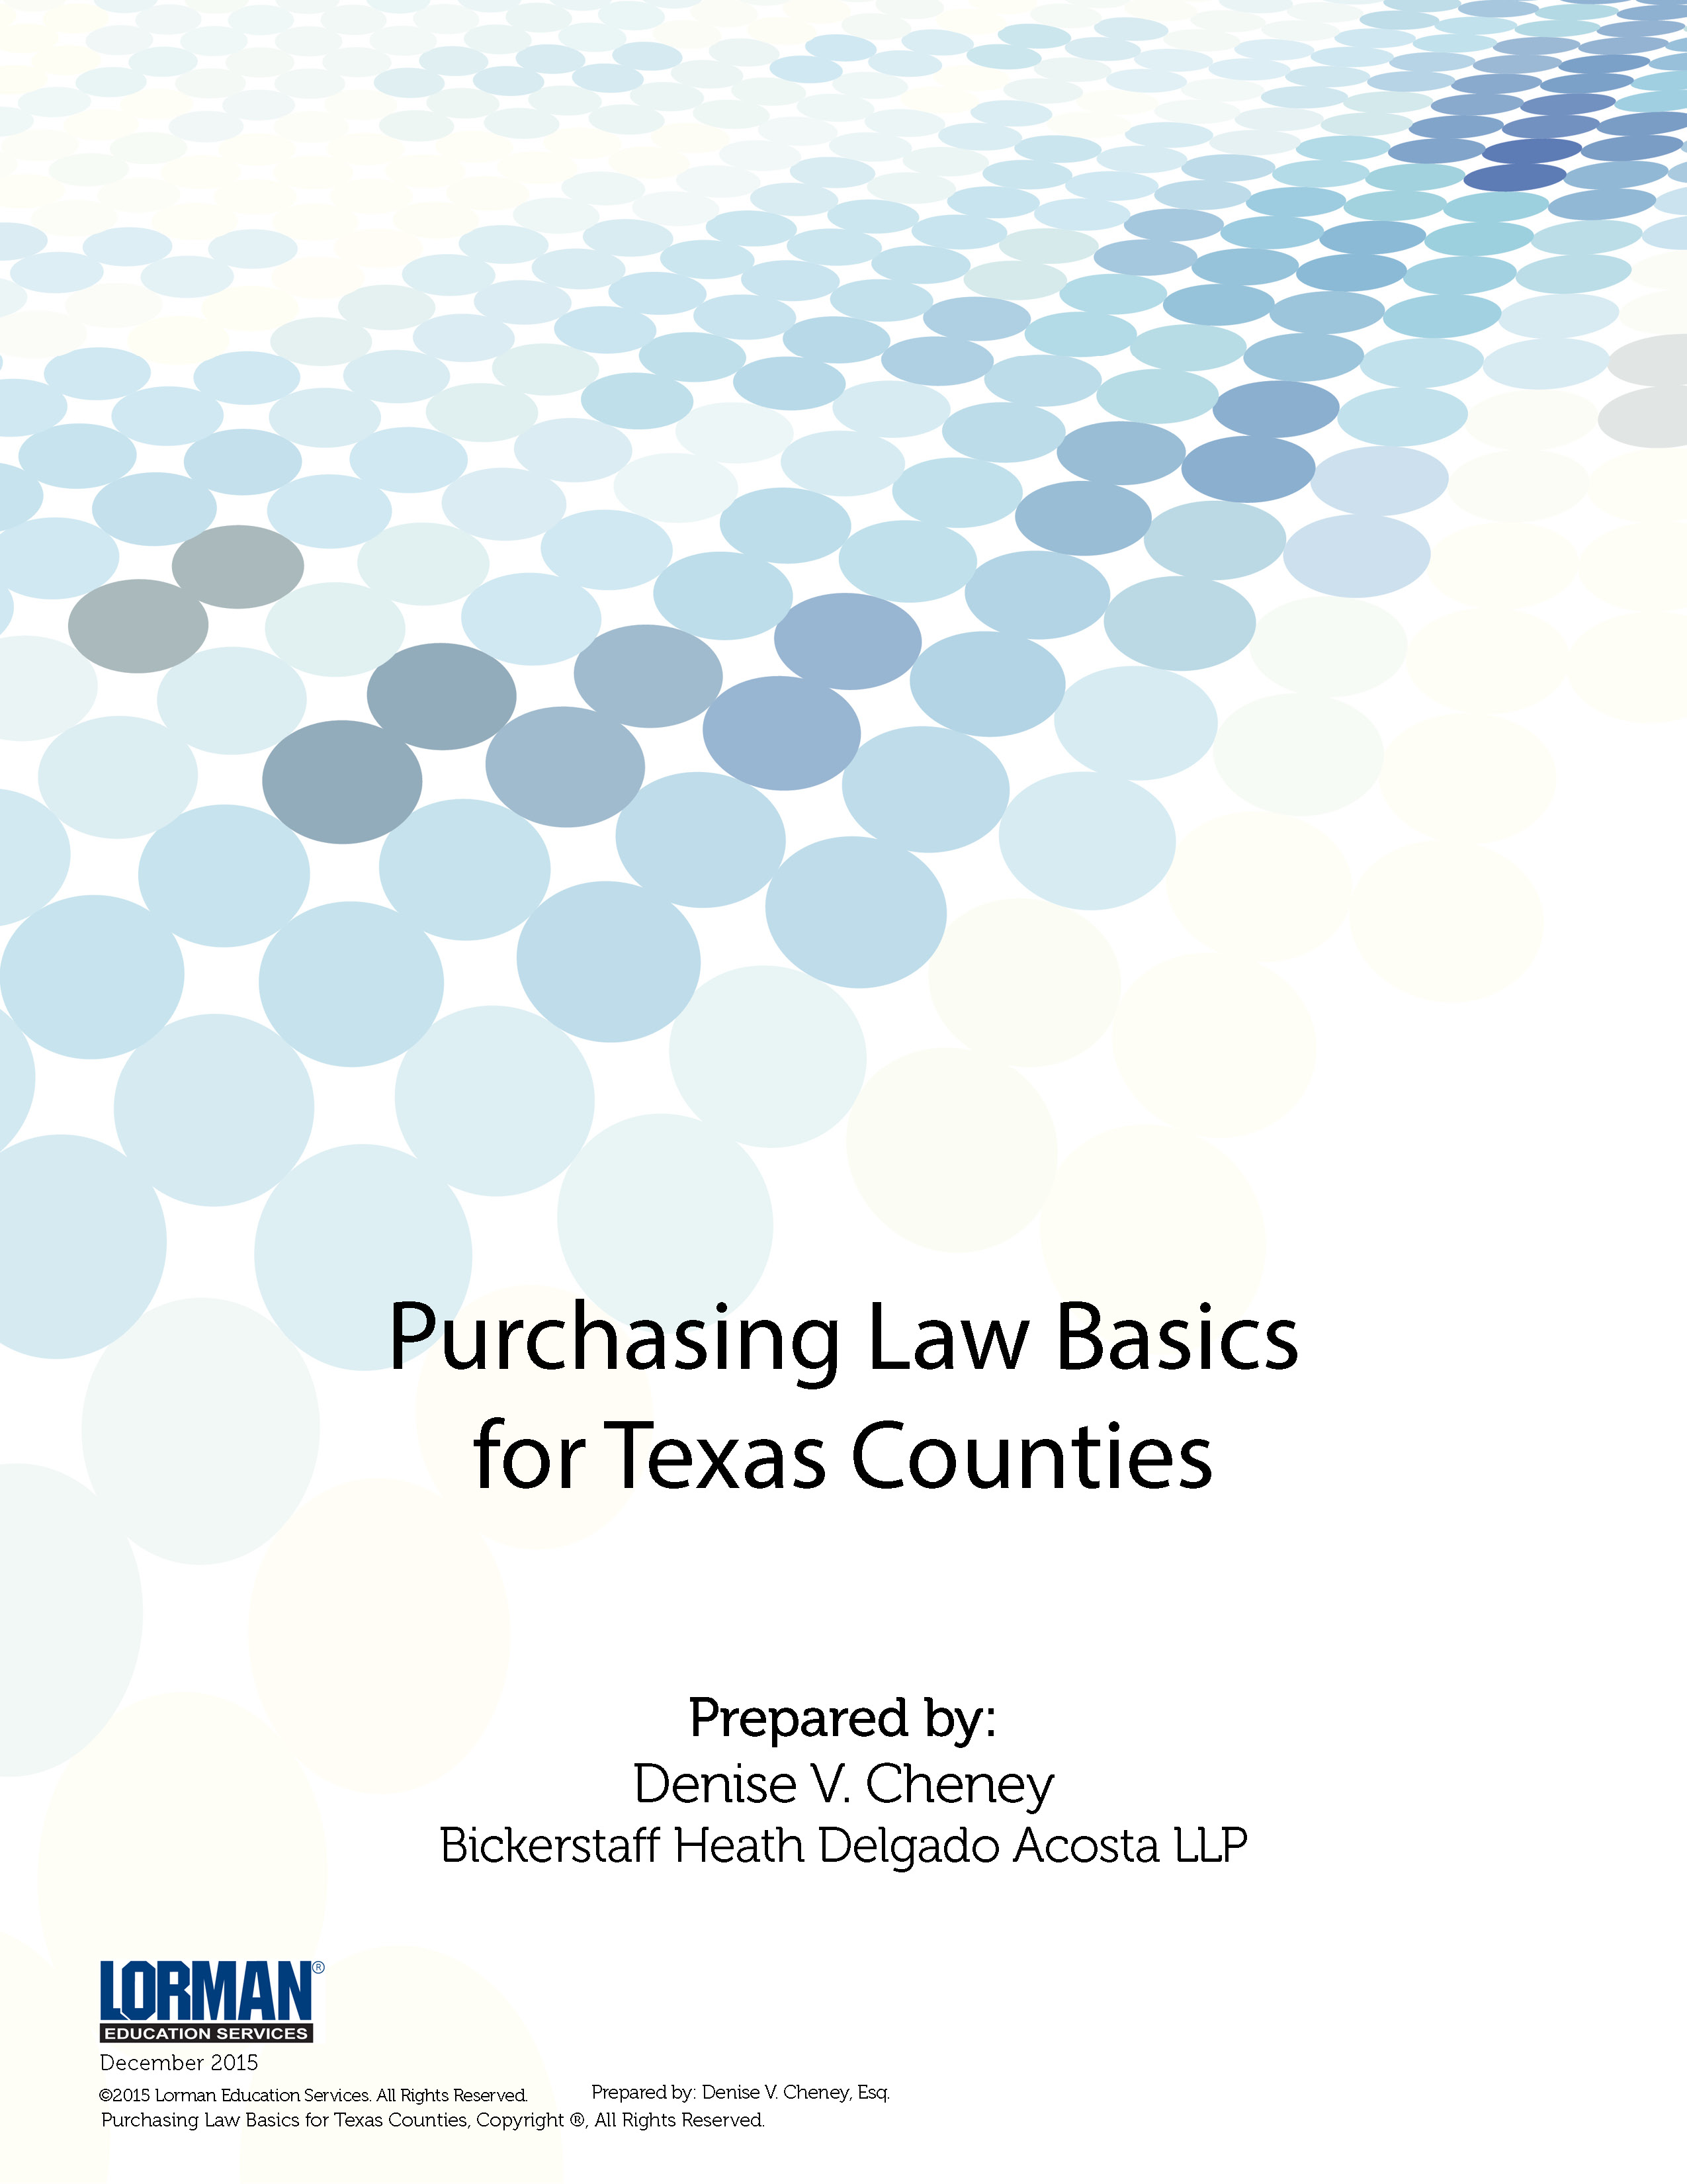 Purchasing Law Basics for Texas Counties